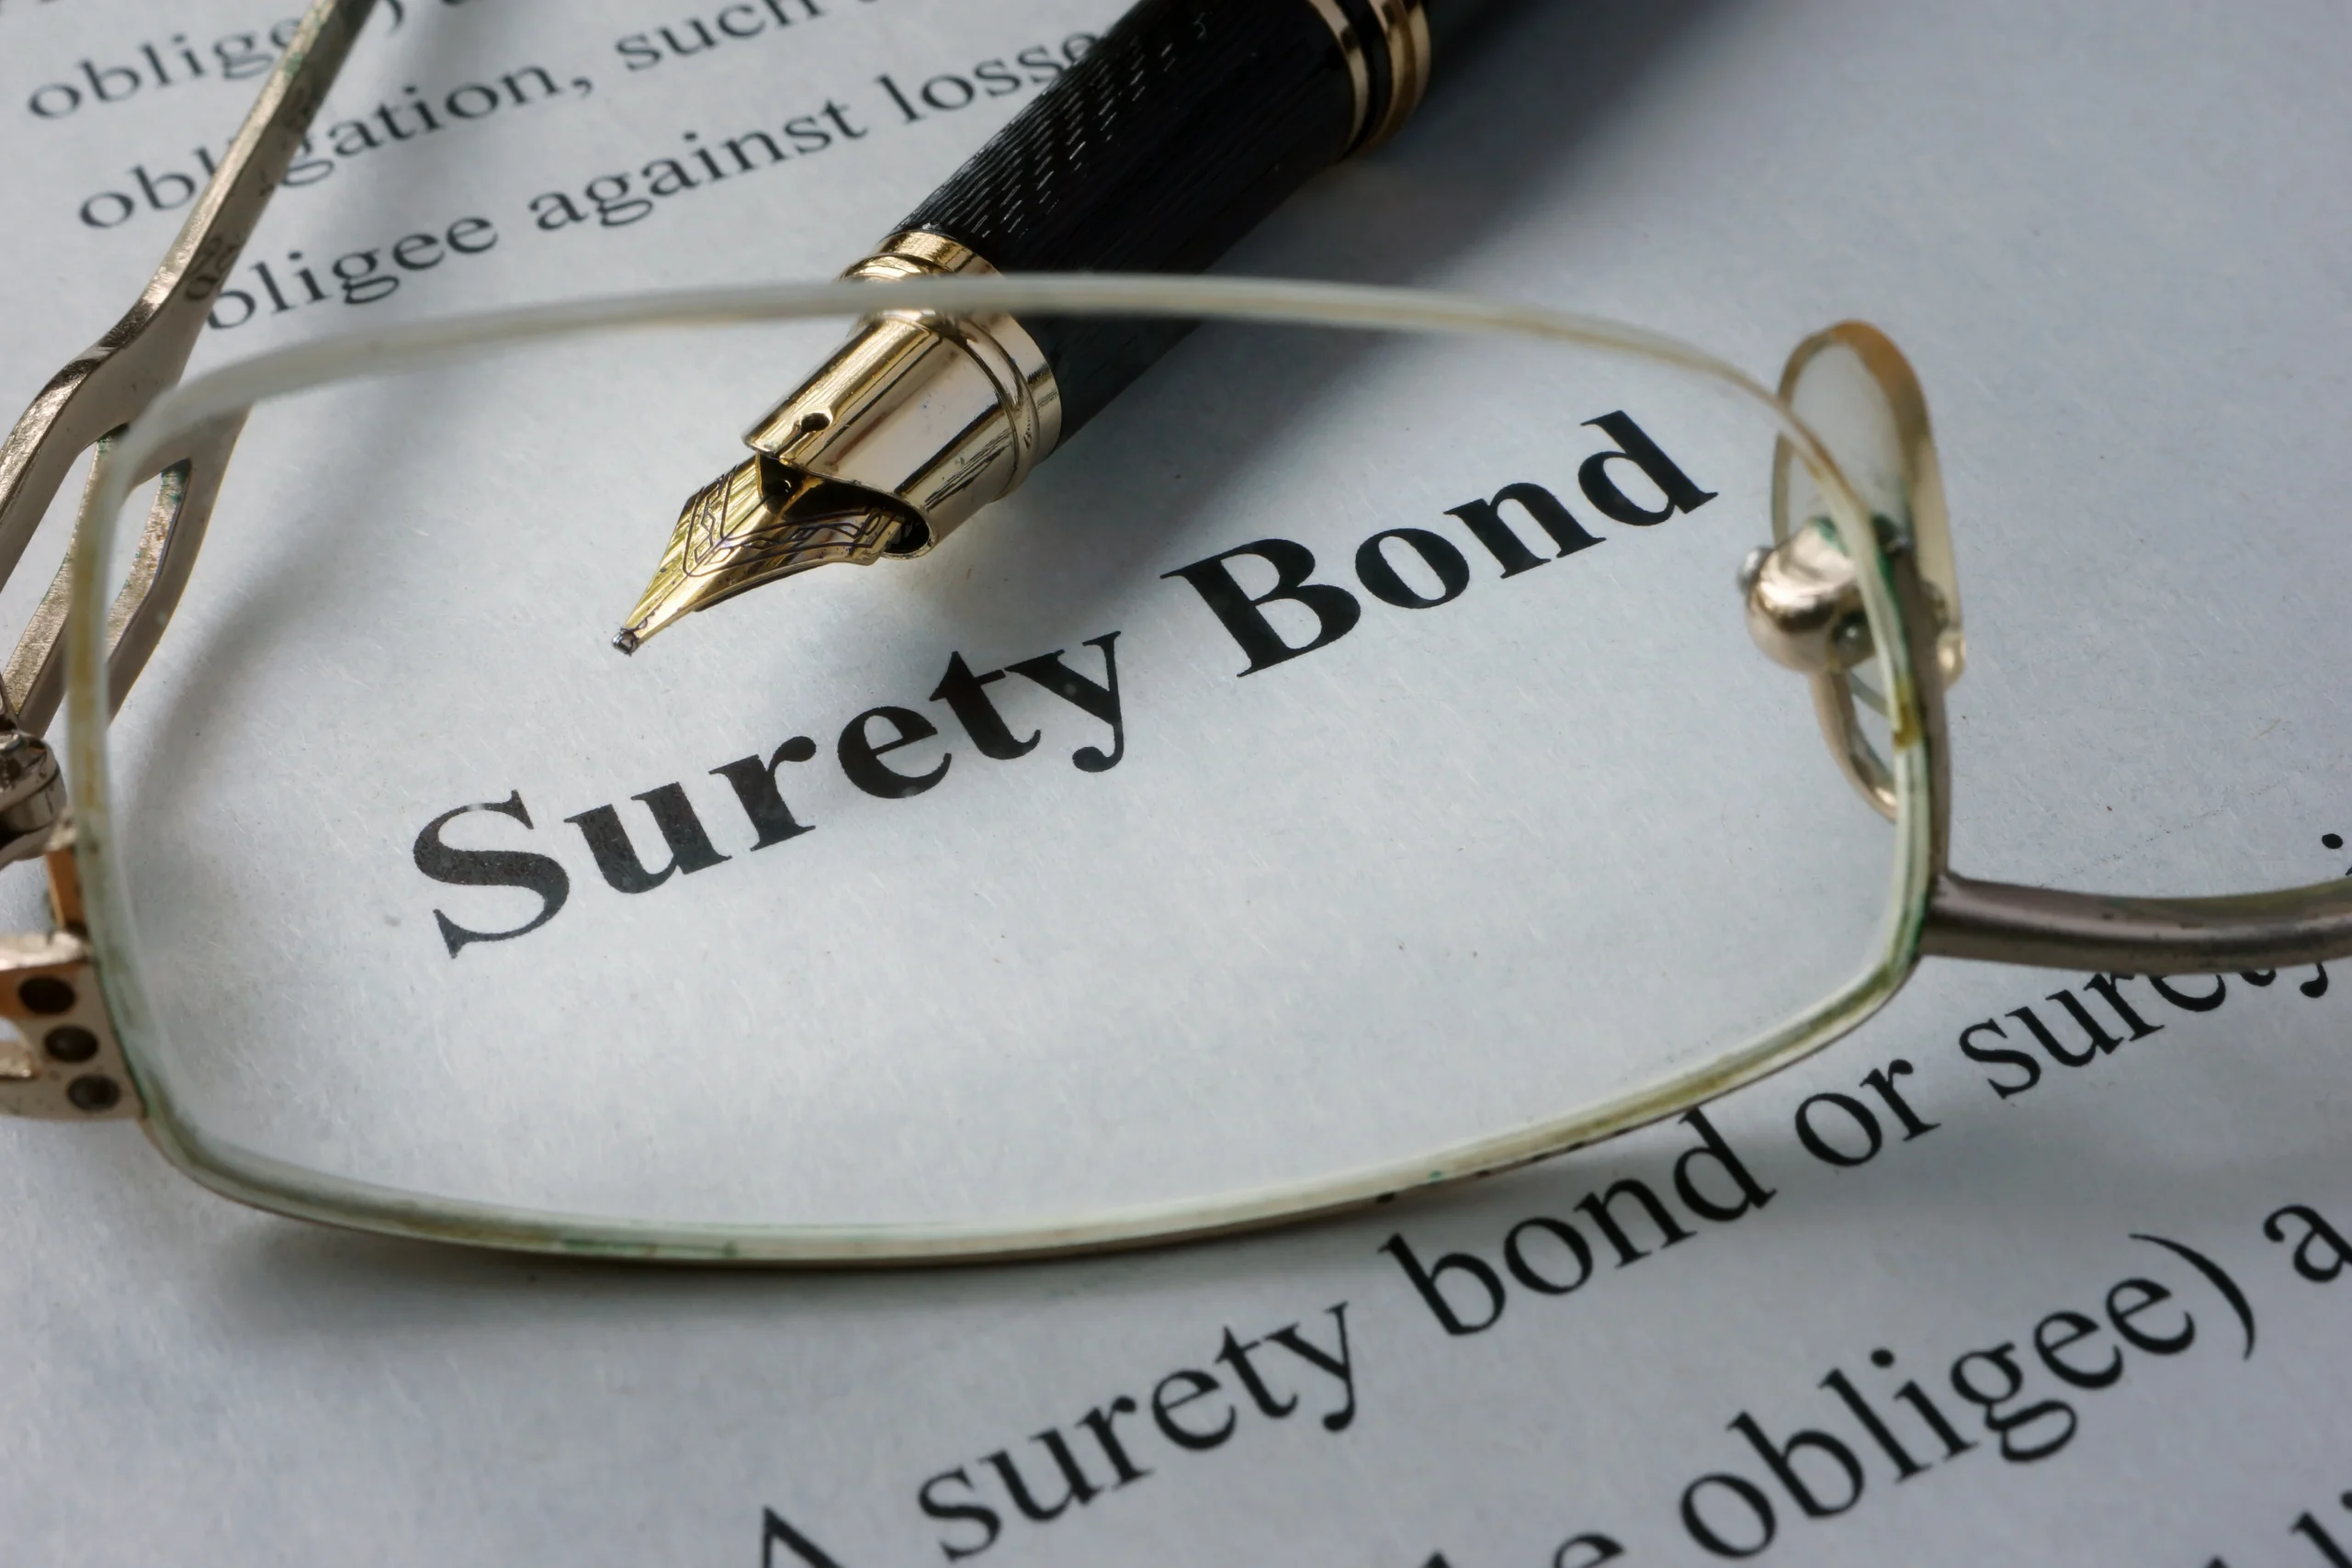 Leading Provider of Surety Bonds For Small Independent Companies